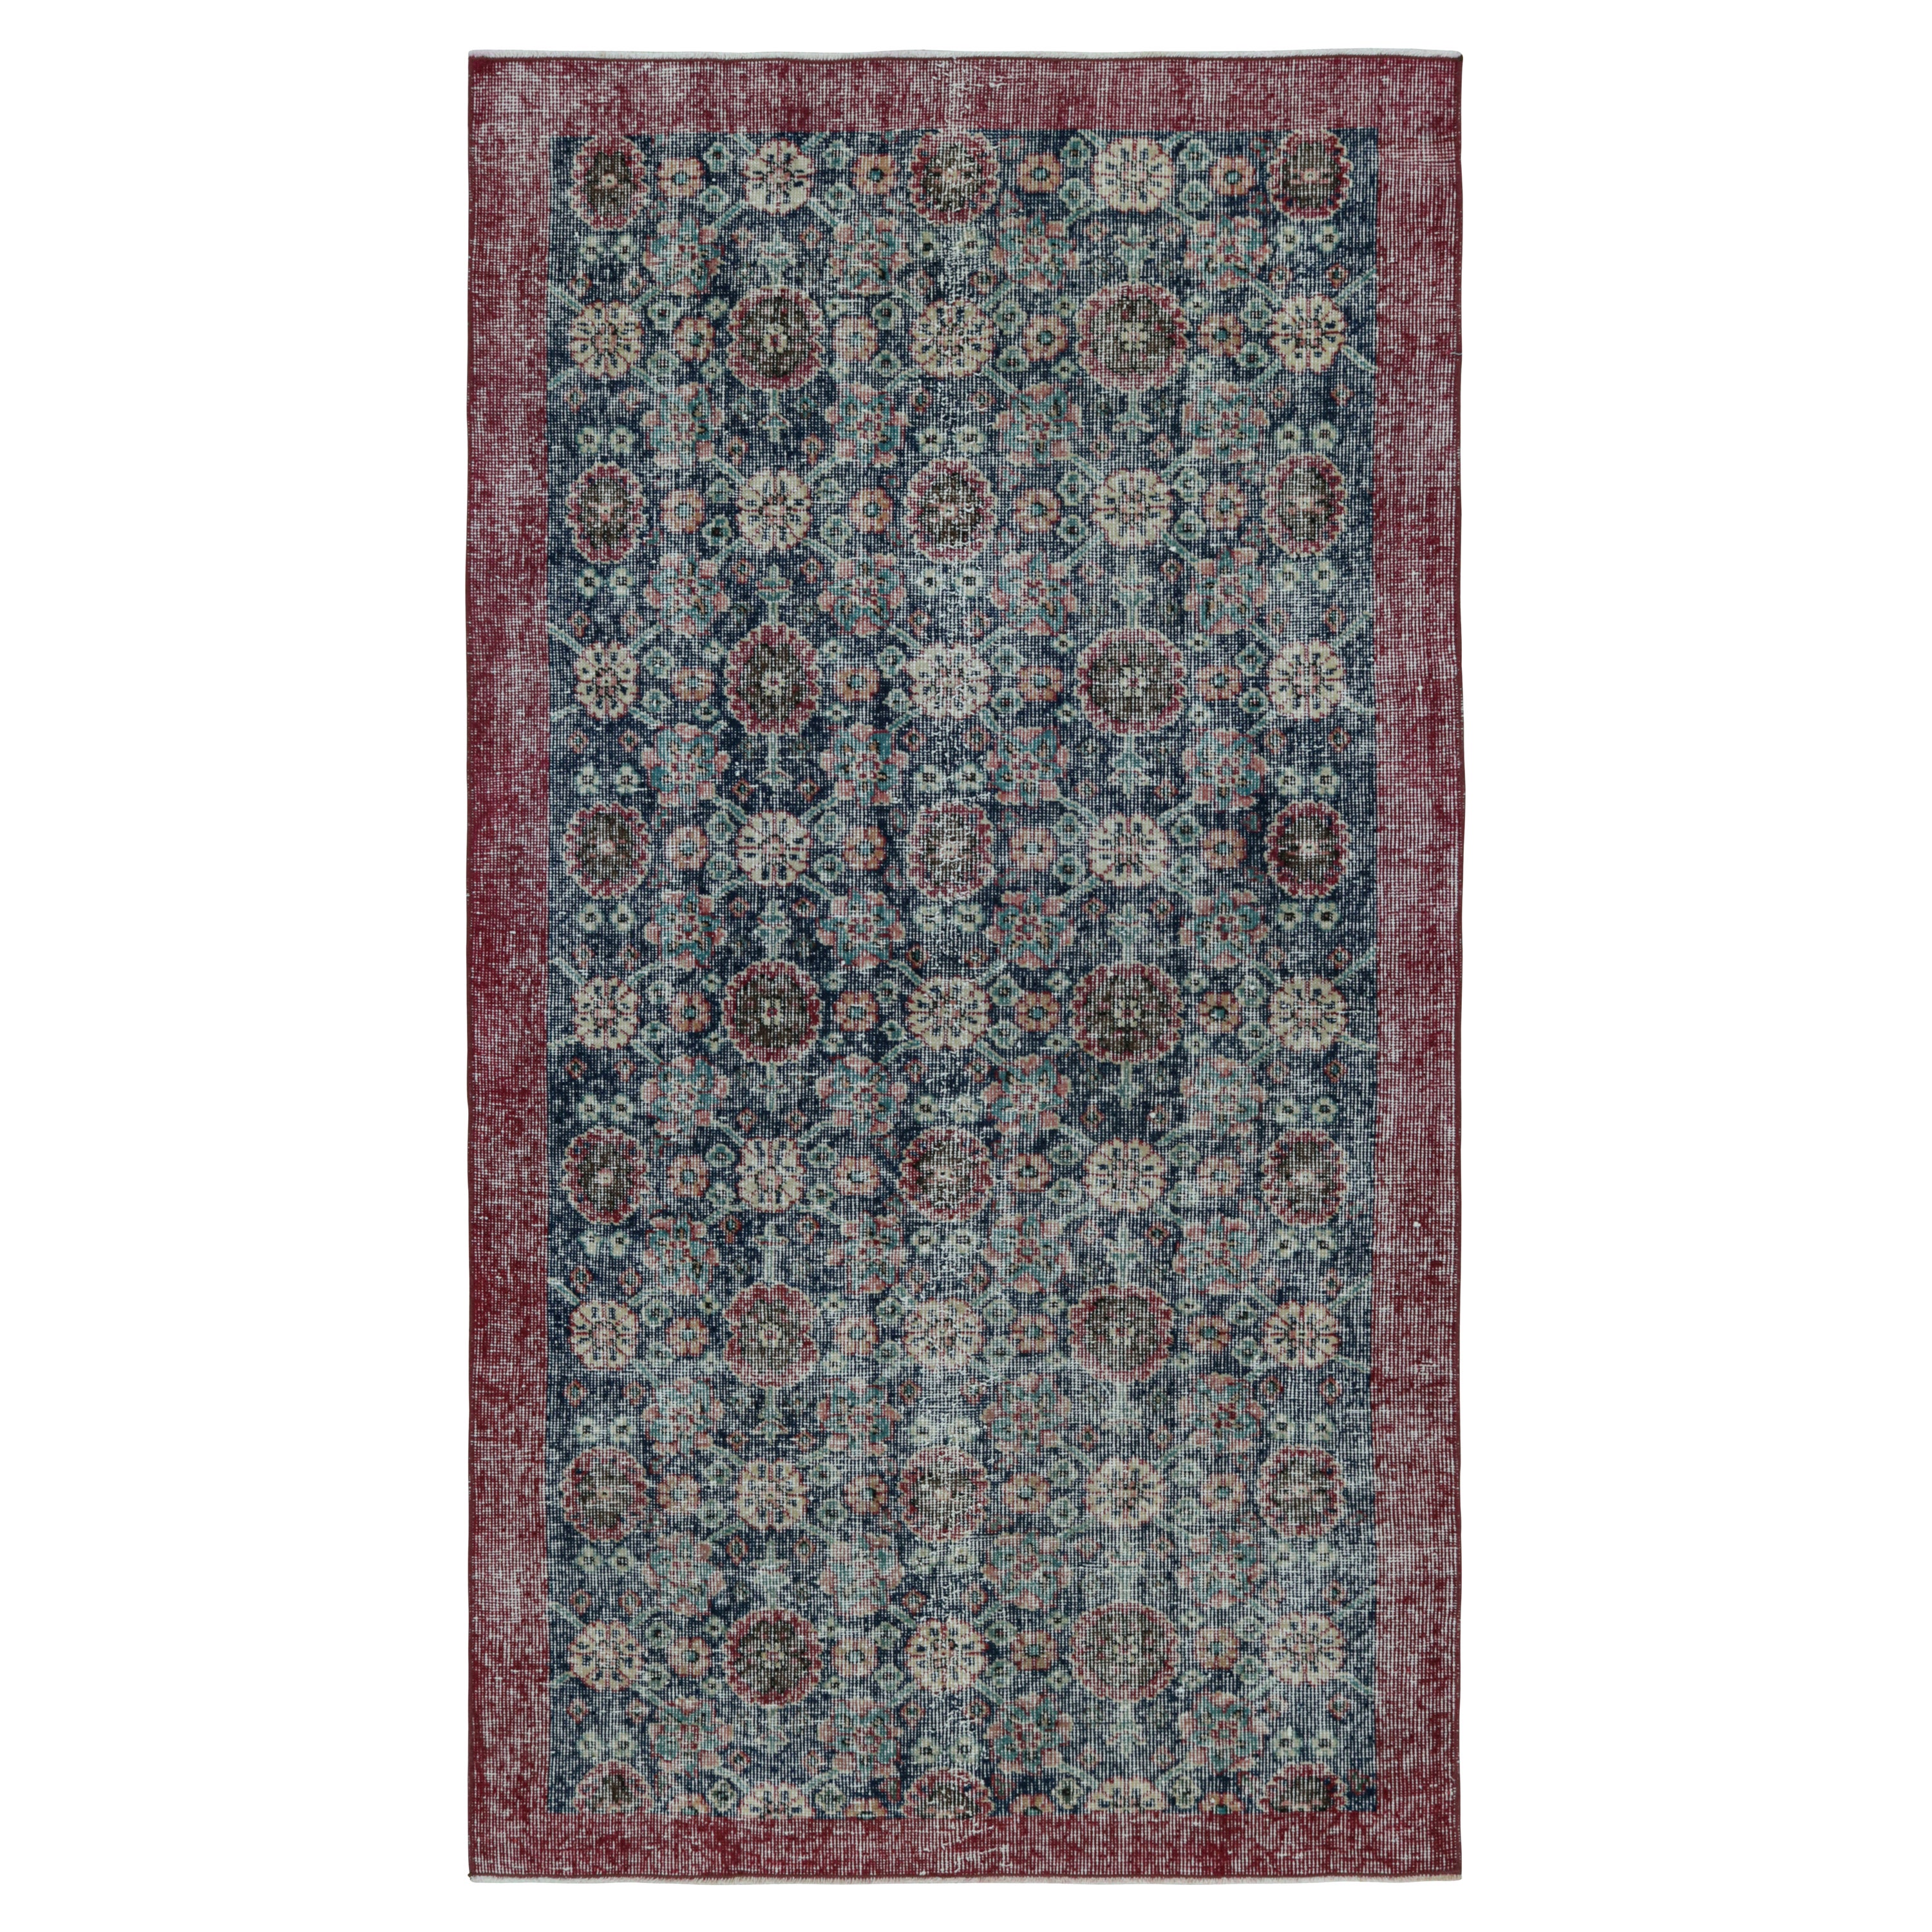 Vintage Runner Rug in Blue and Burgundy with Floral Patterns, from Rug & Kilim For Sale